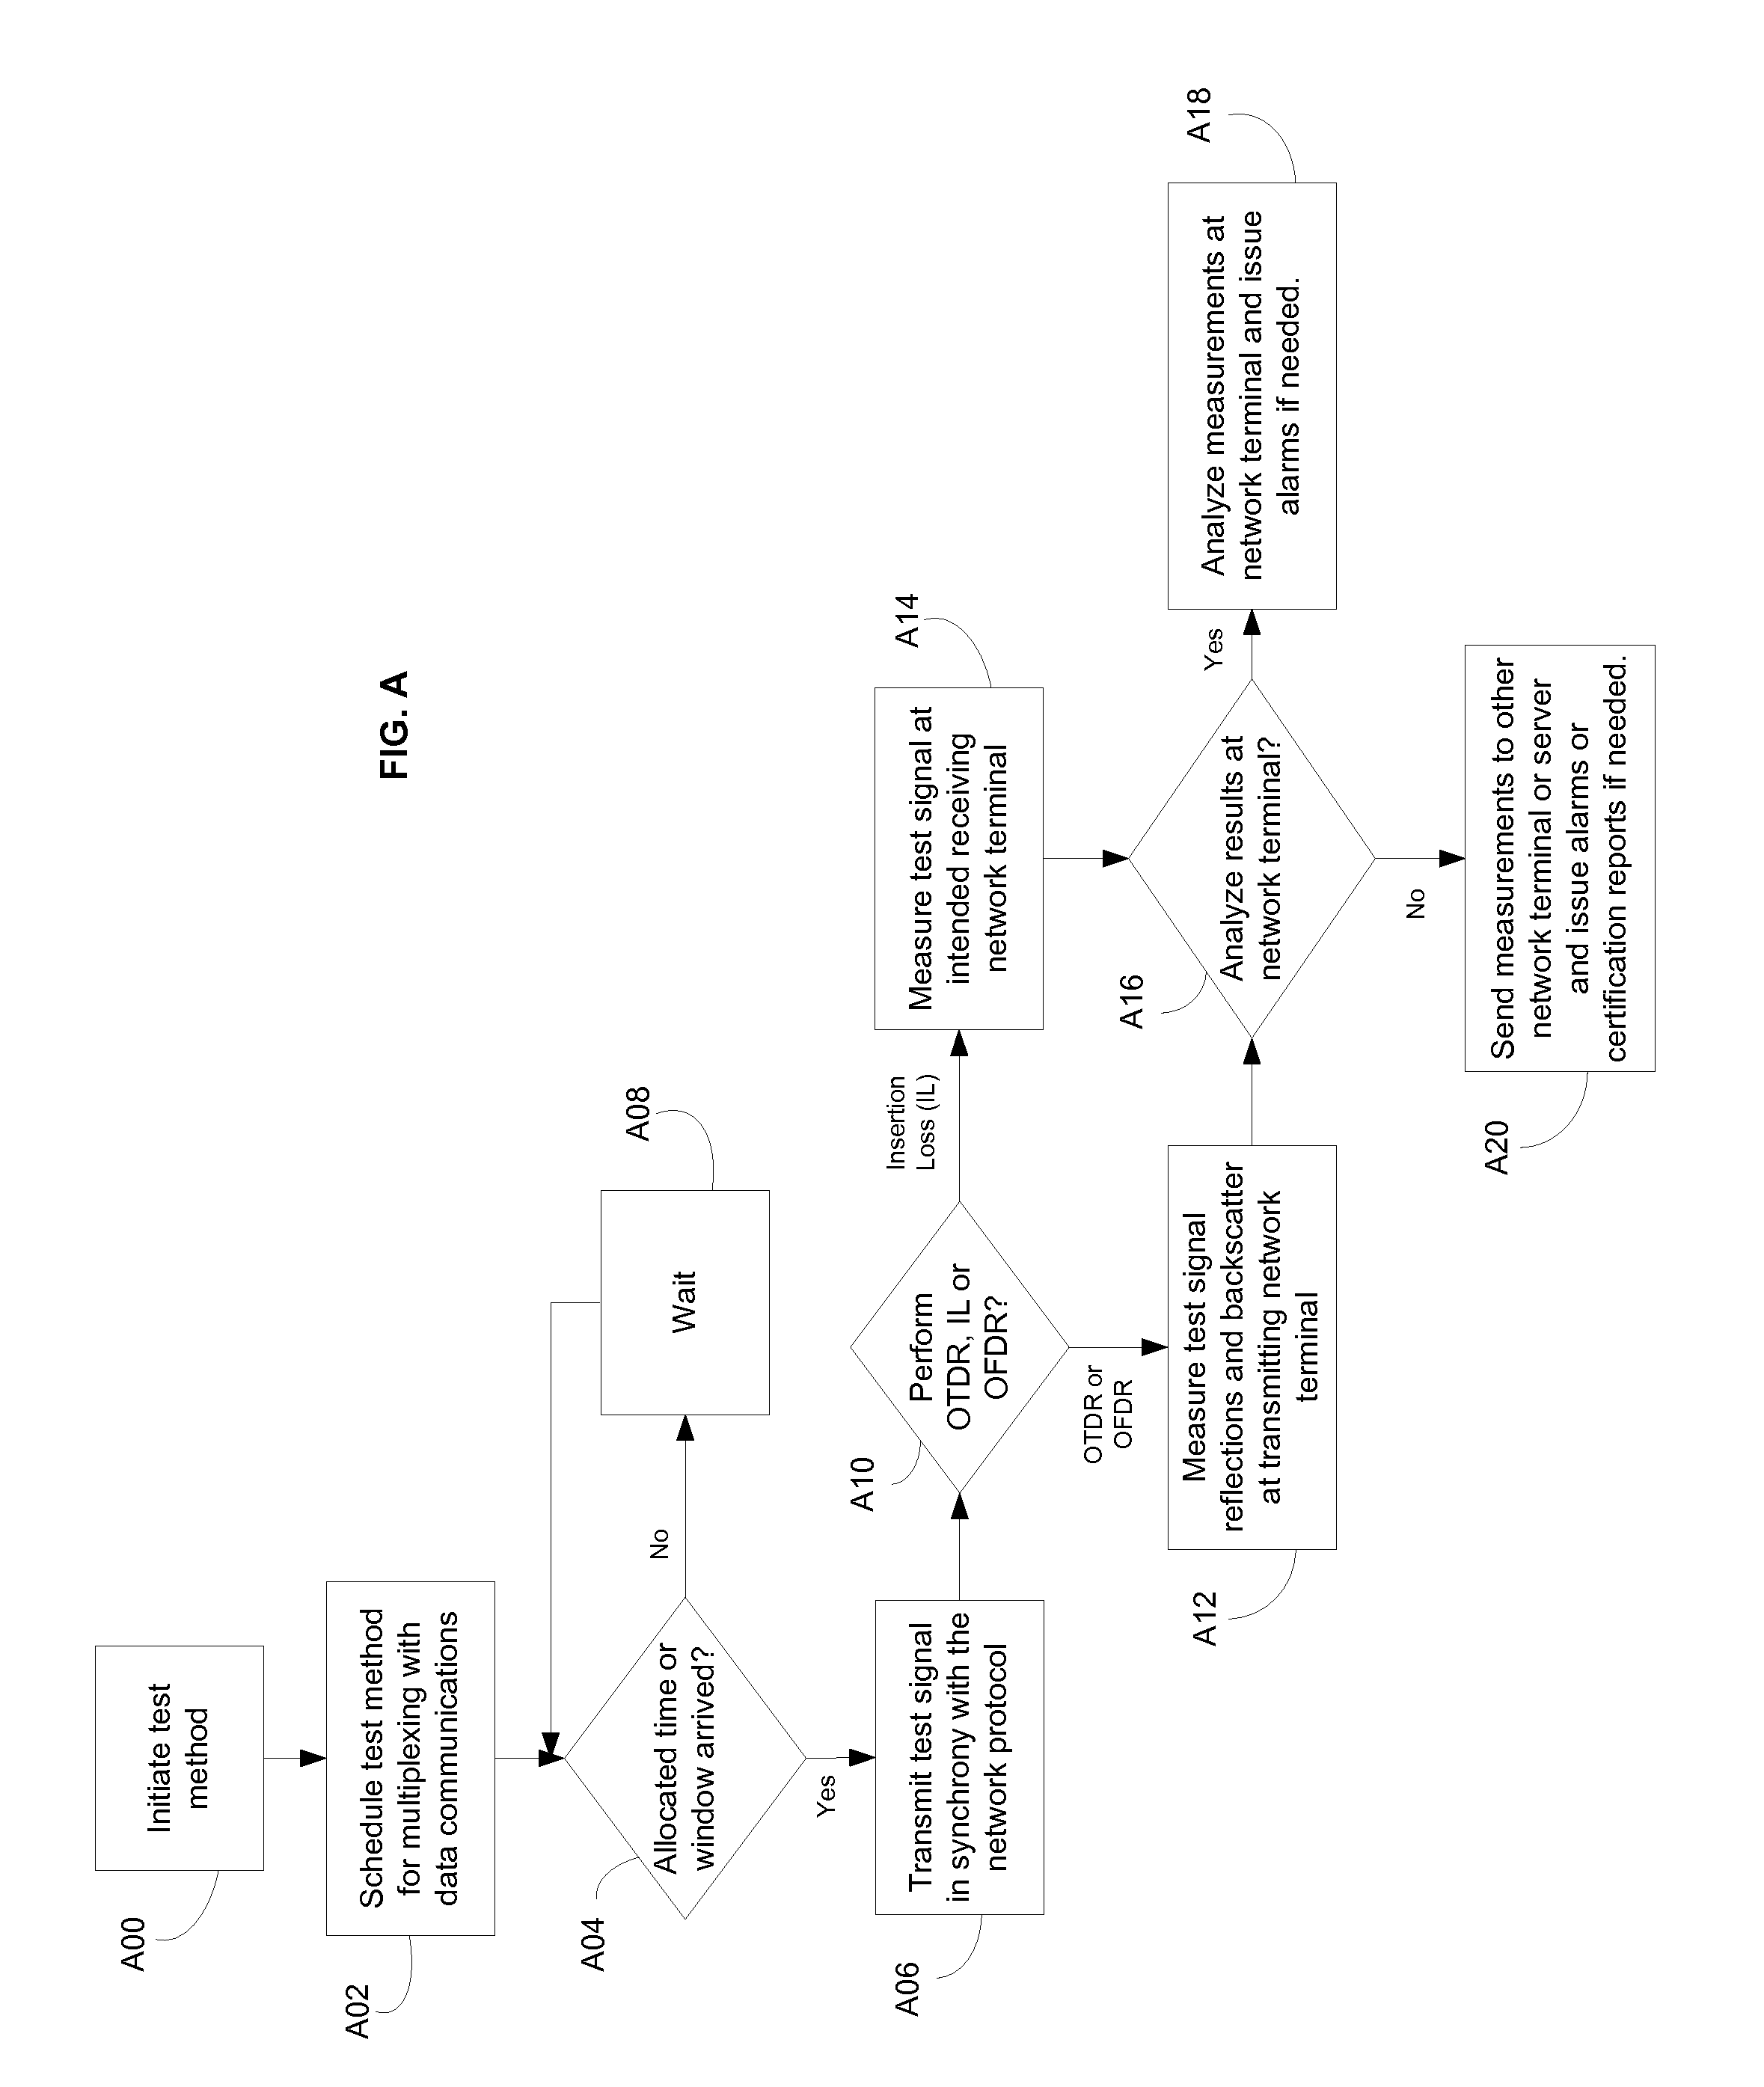 System and method for performing in-service optical fiber network certification